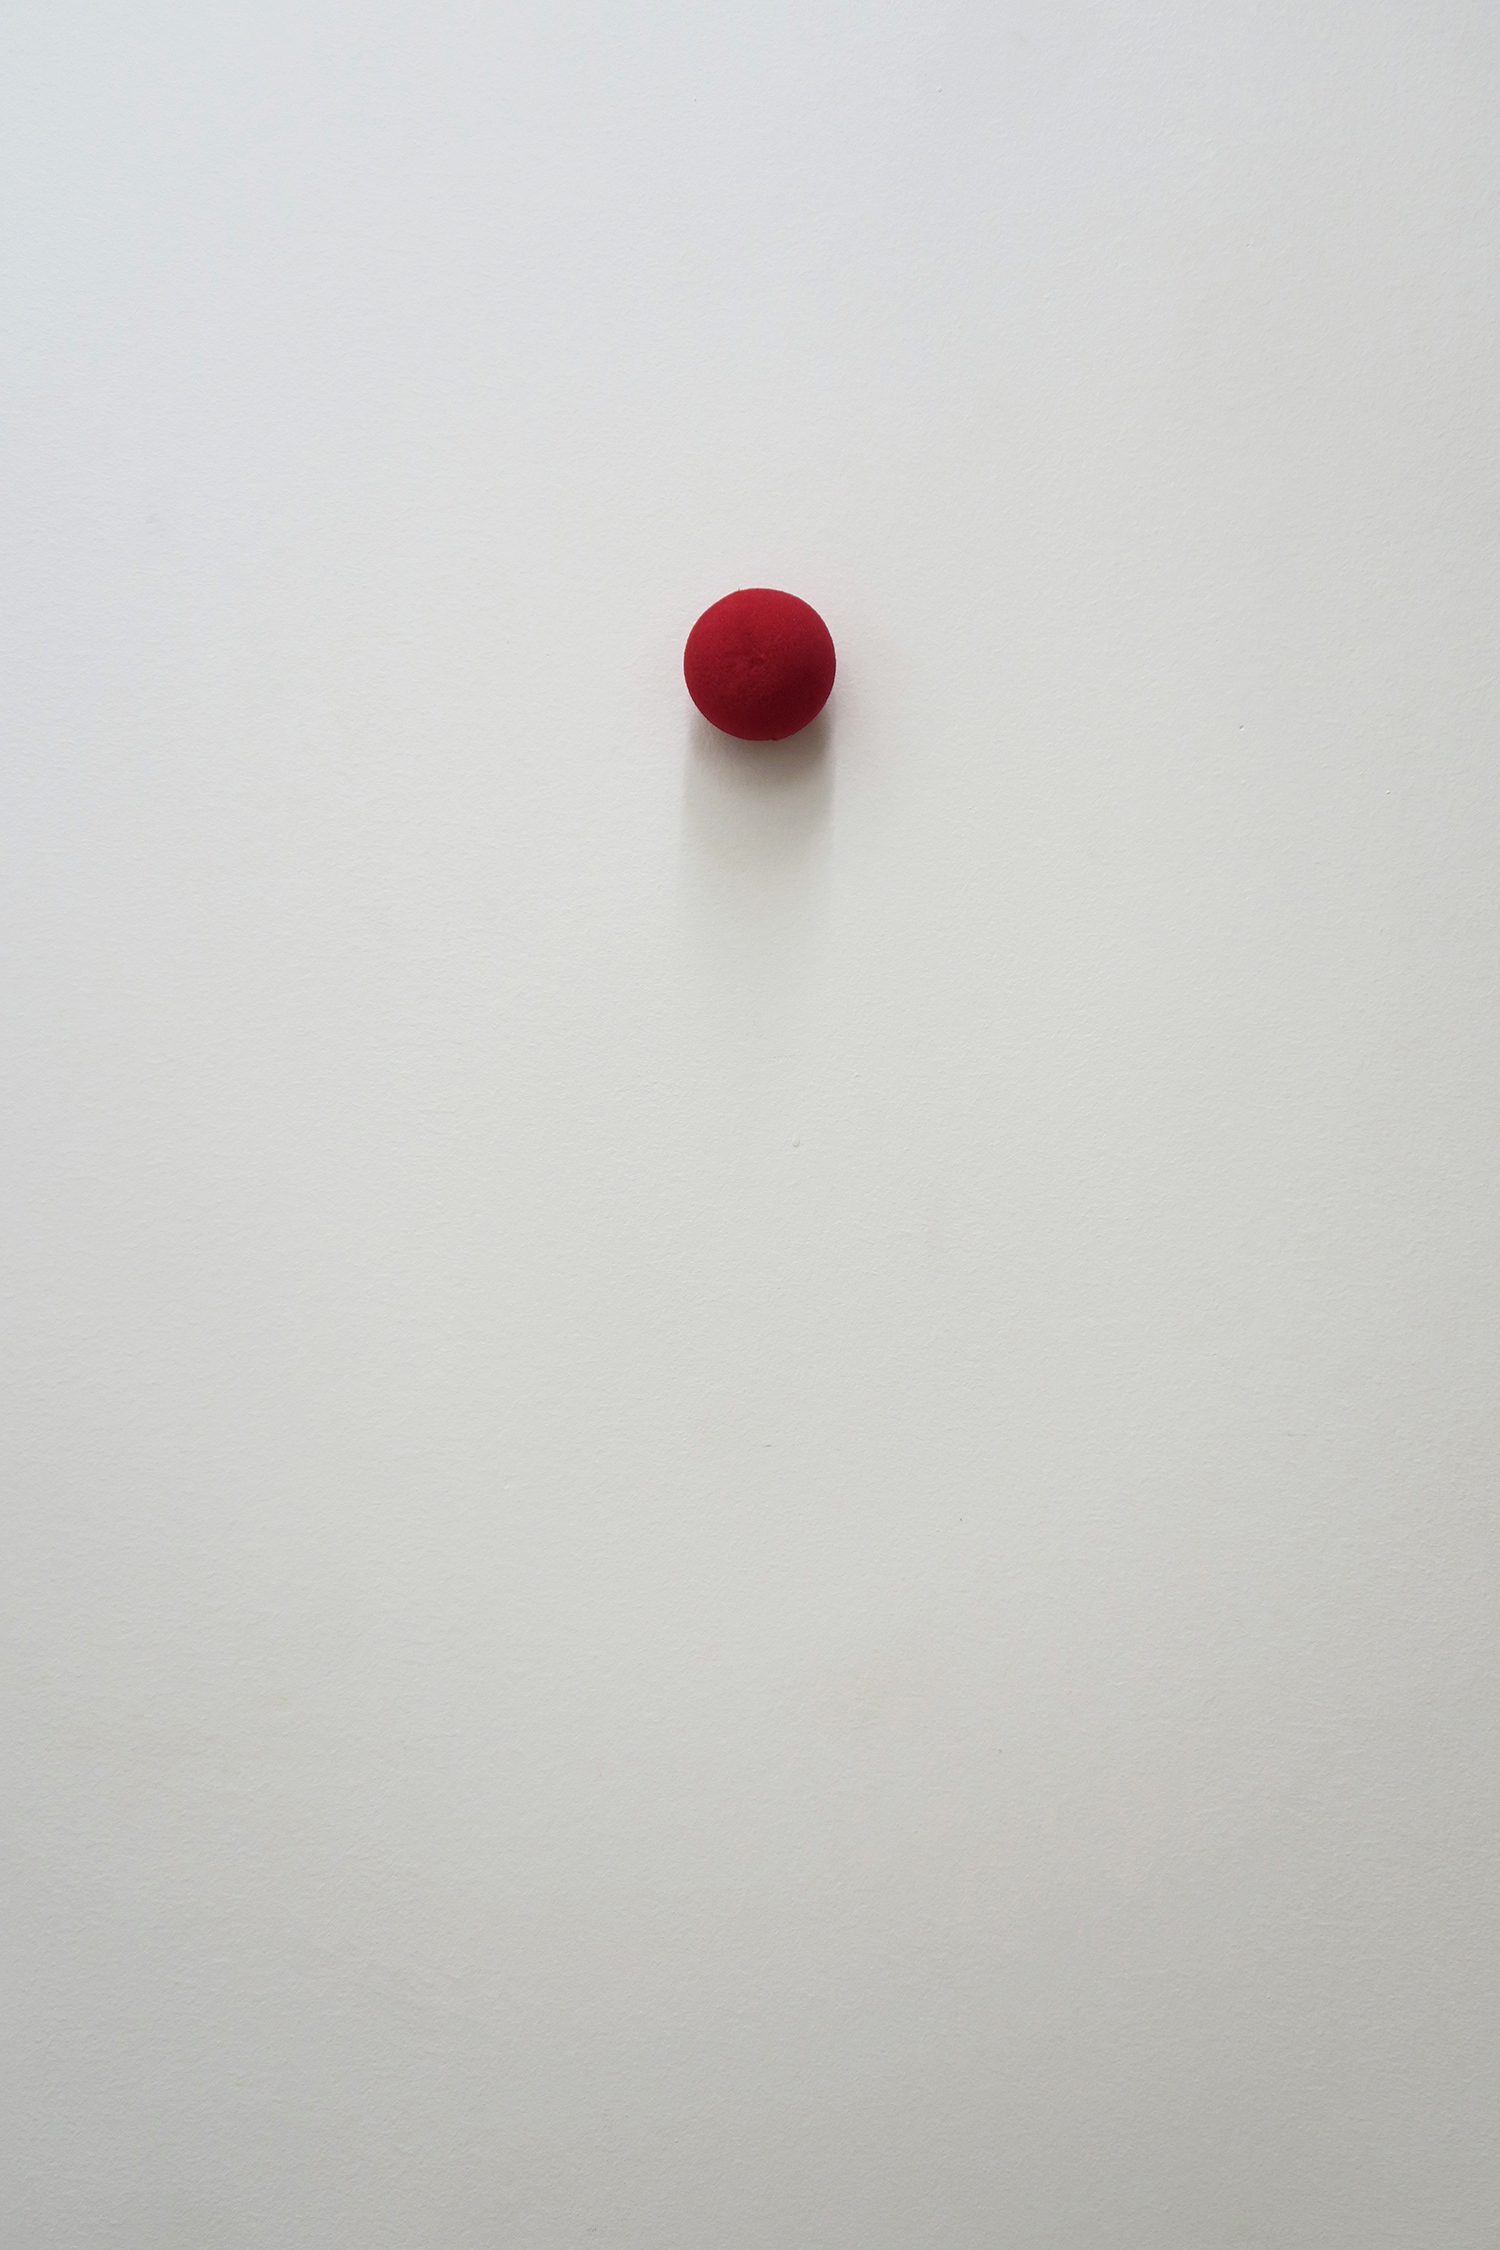 Clémentine Adou, Red nose, red dot, 2023, red nose, motor, 5 × 5 × 5 cm